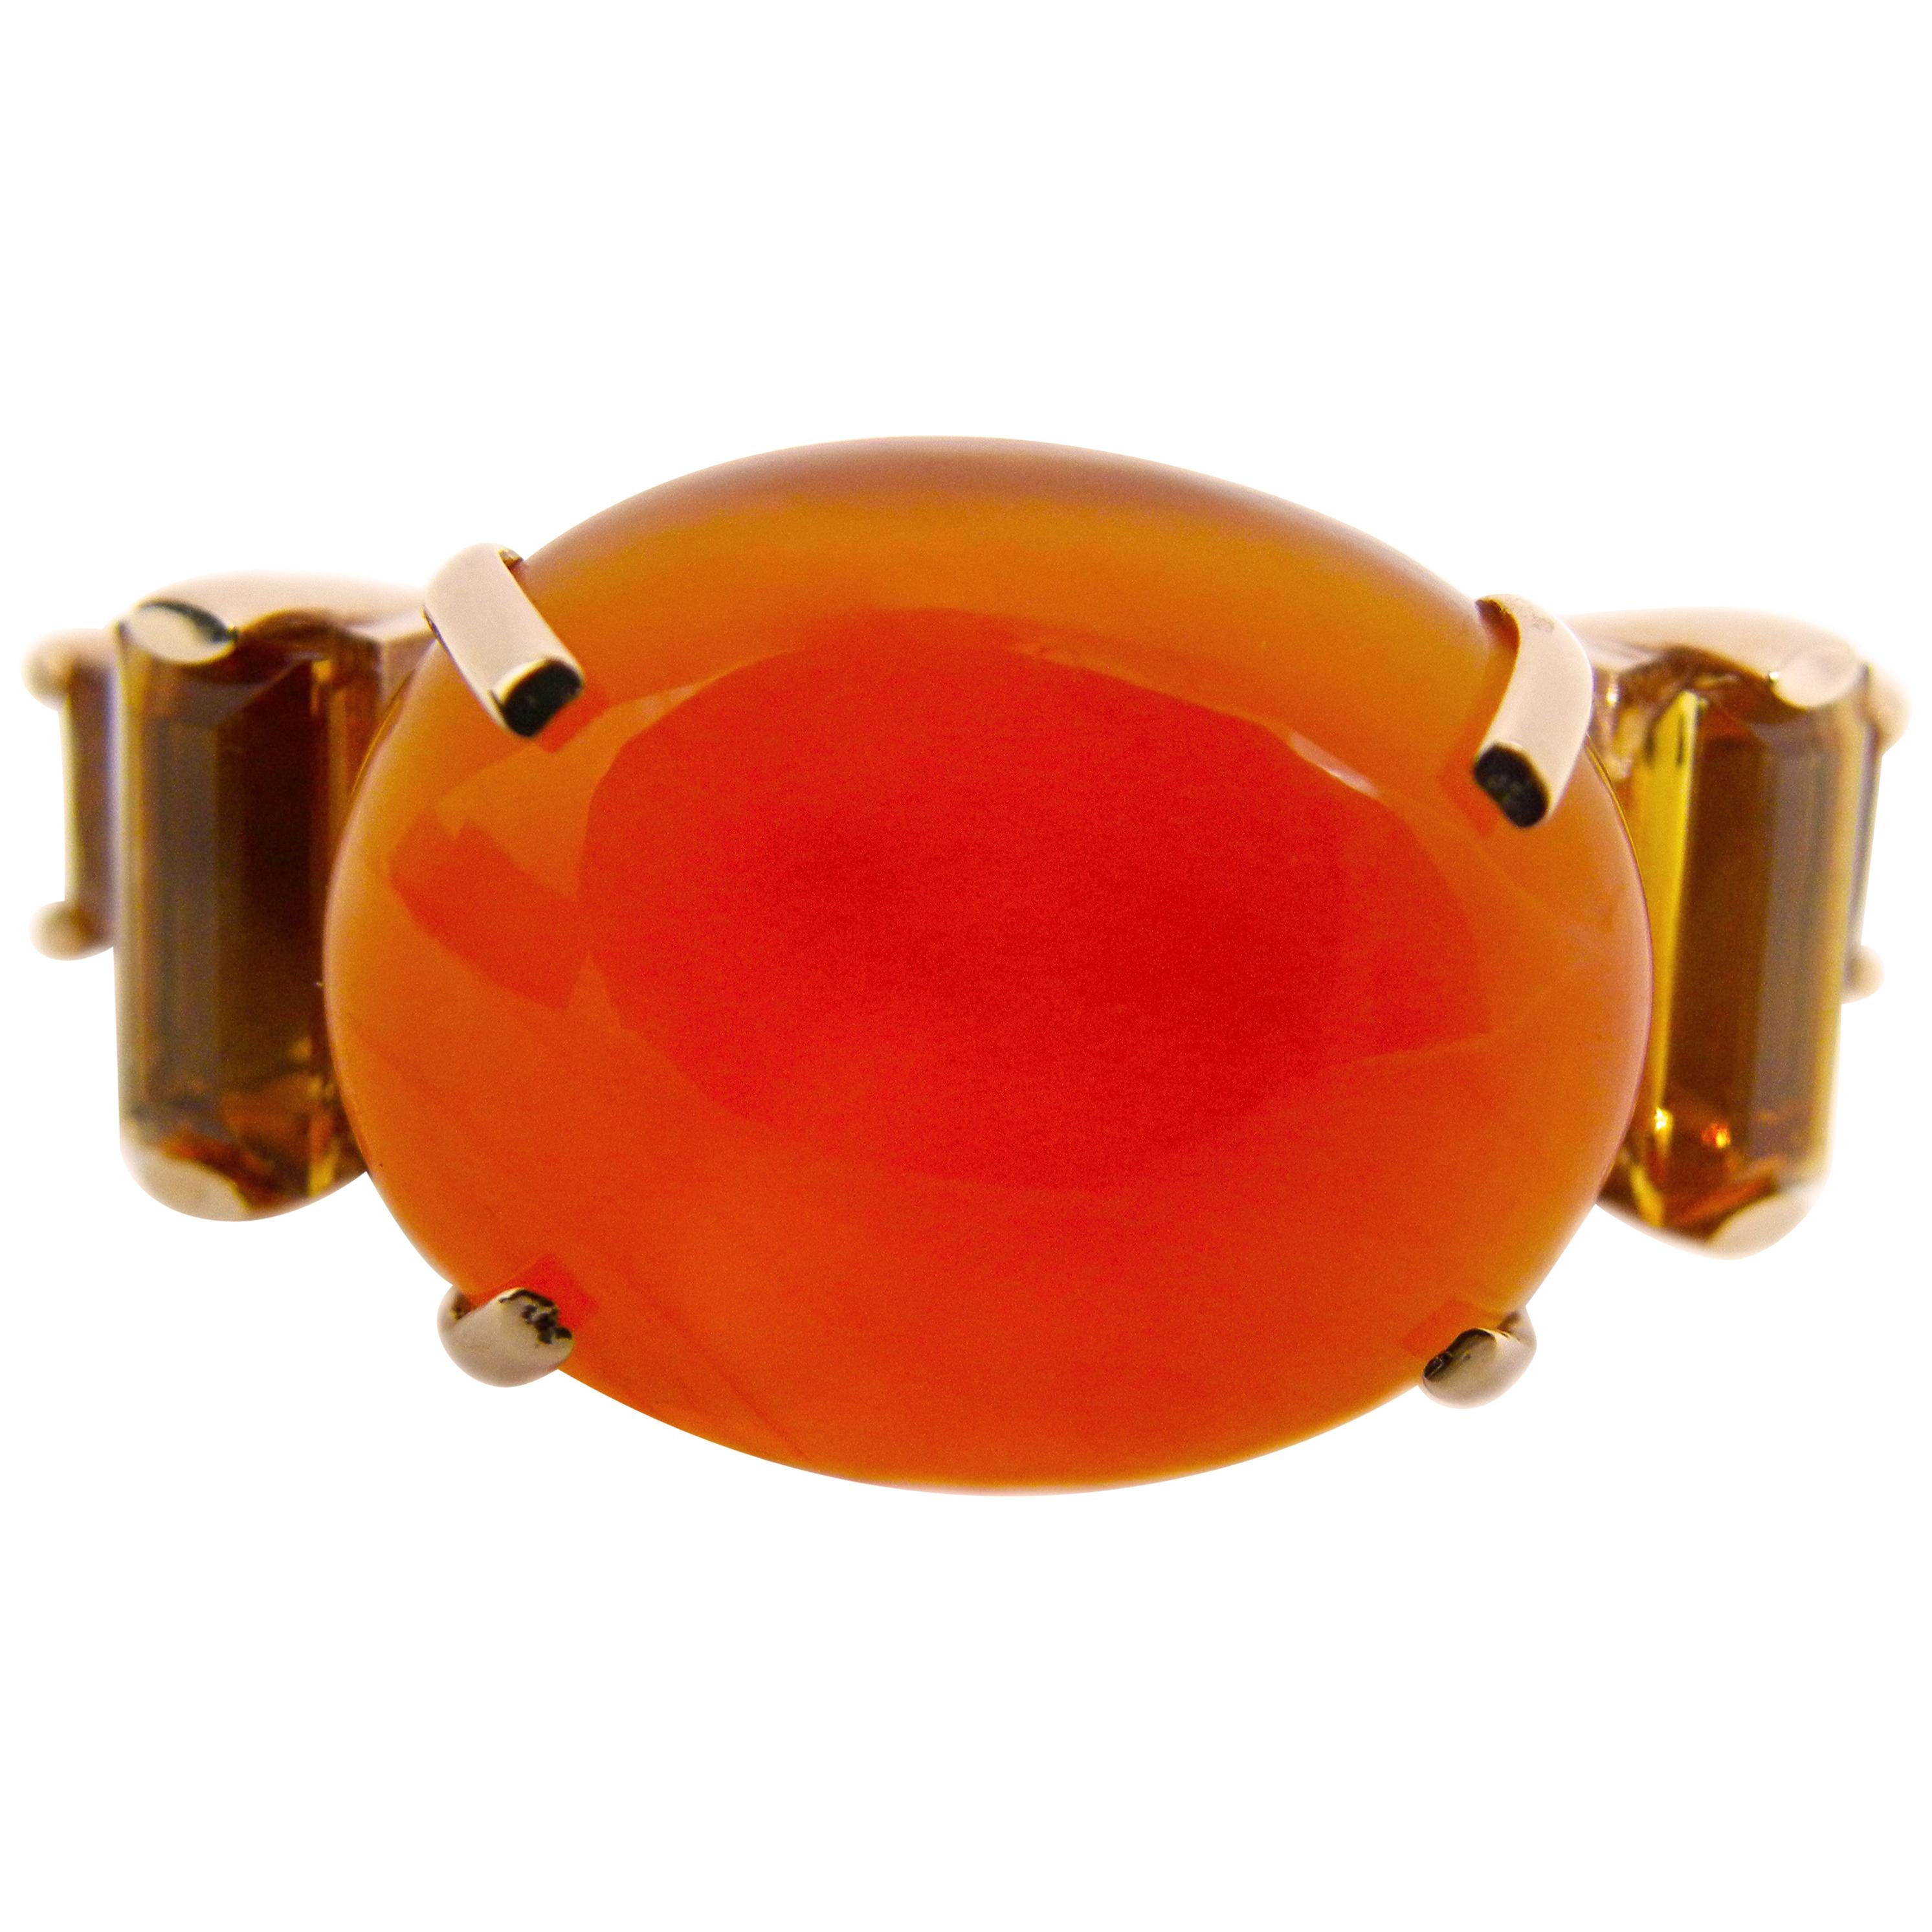 One-of-a-Kind 15 Carat Natural Carnelian Cabochon Citrine Baguette Cocktail Ring